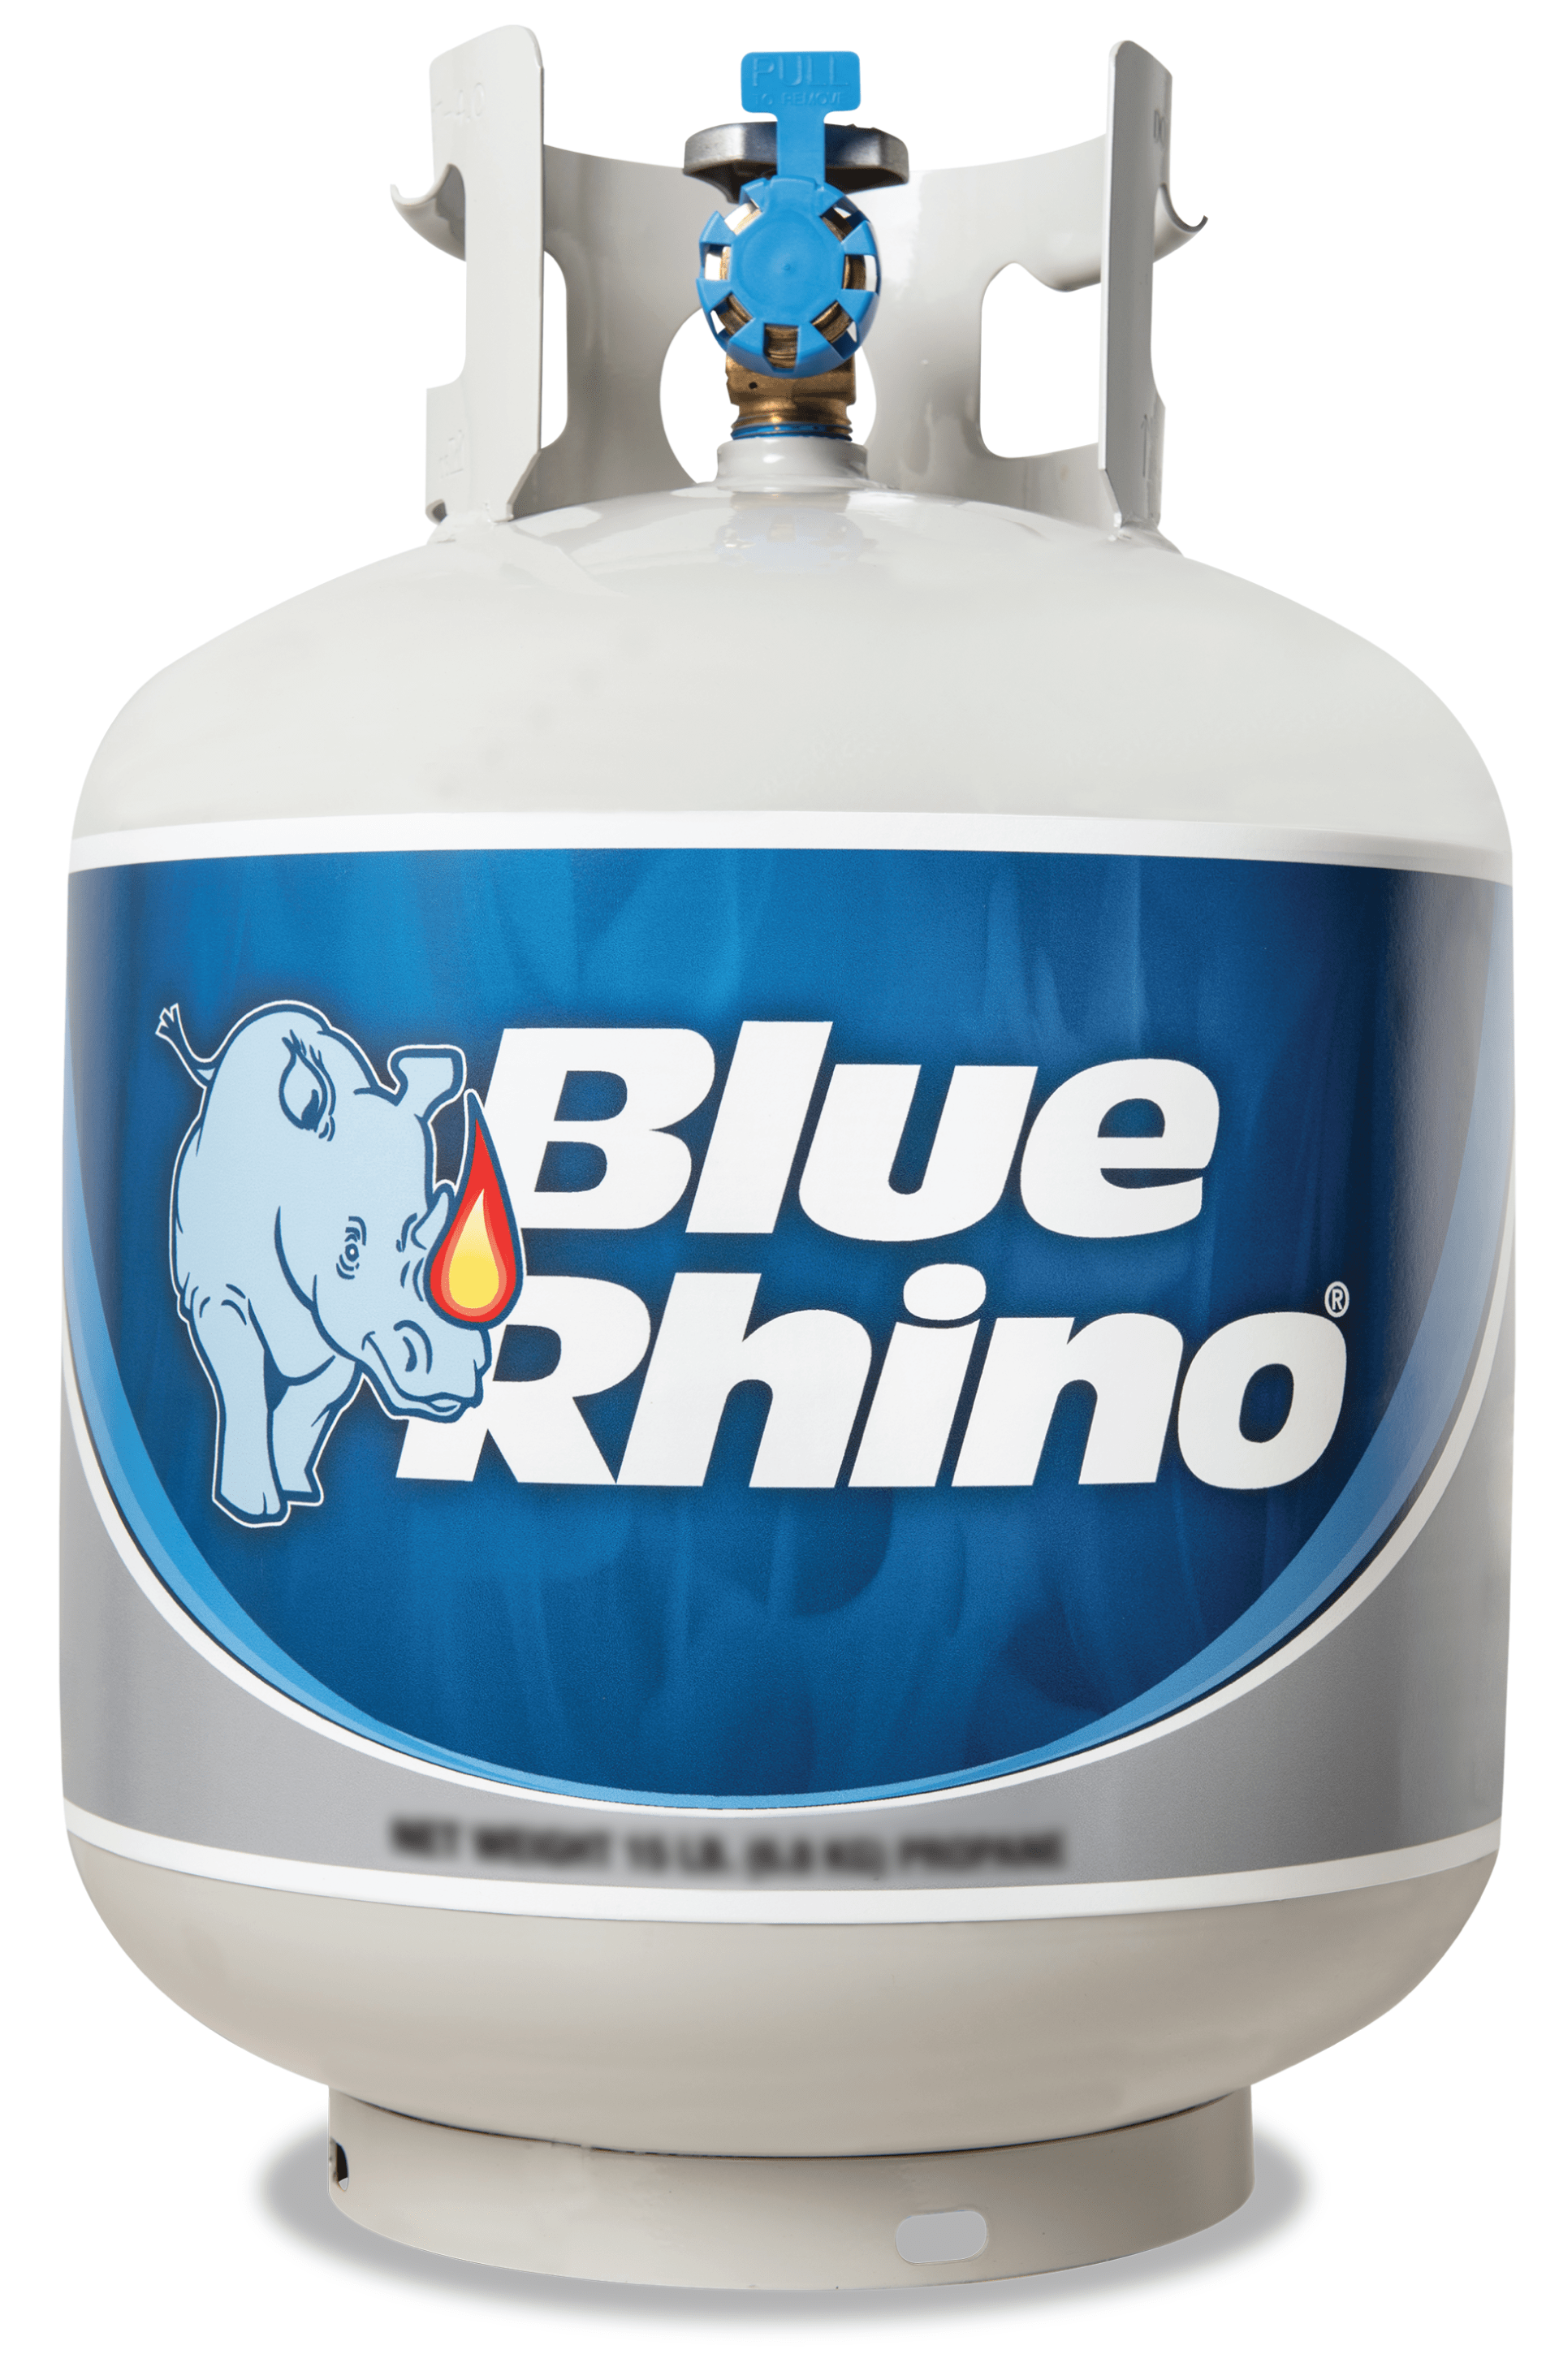 Blue Rhino Steel Propane Tank Exchange In The Propane Tanks Accessories Department At Lowes Com